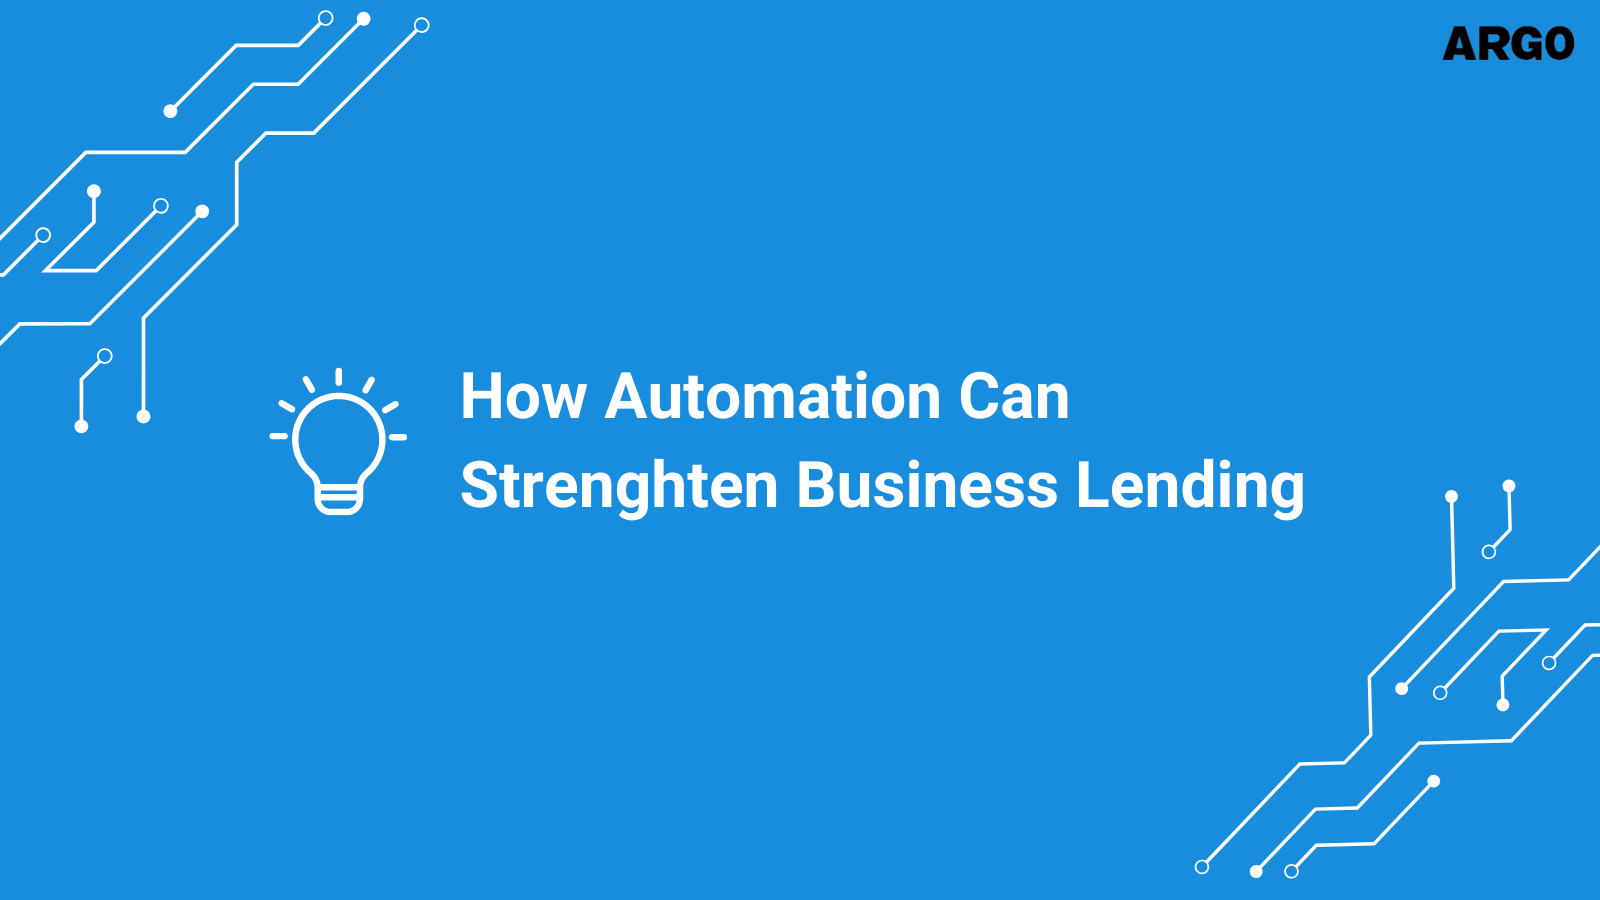 How Automation Can Strengthen Business Lending